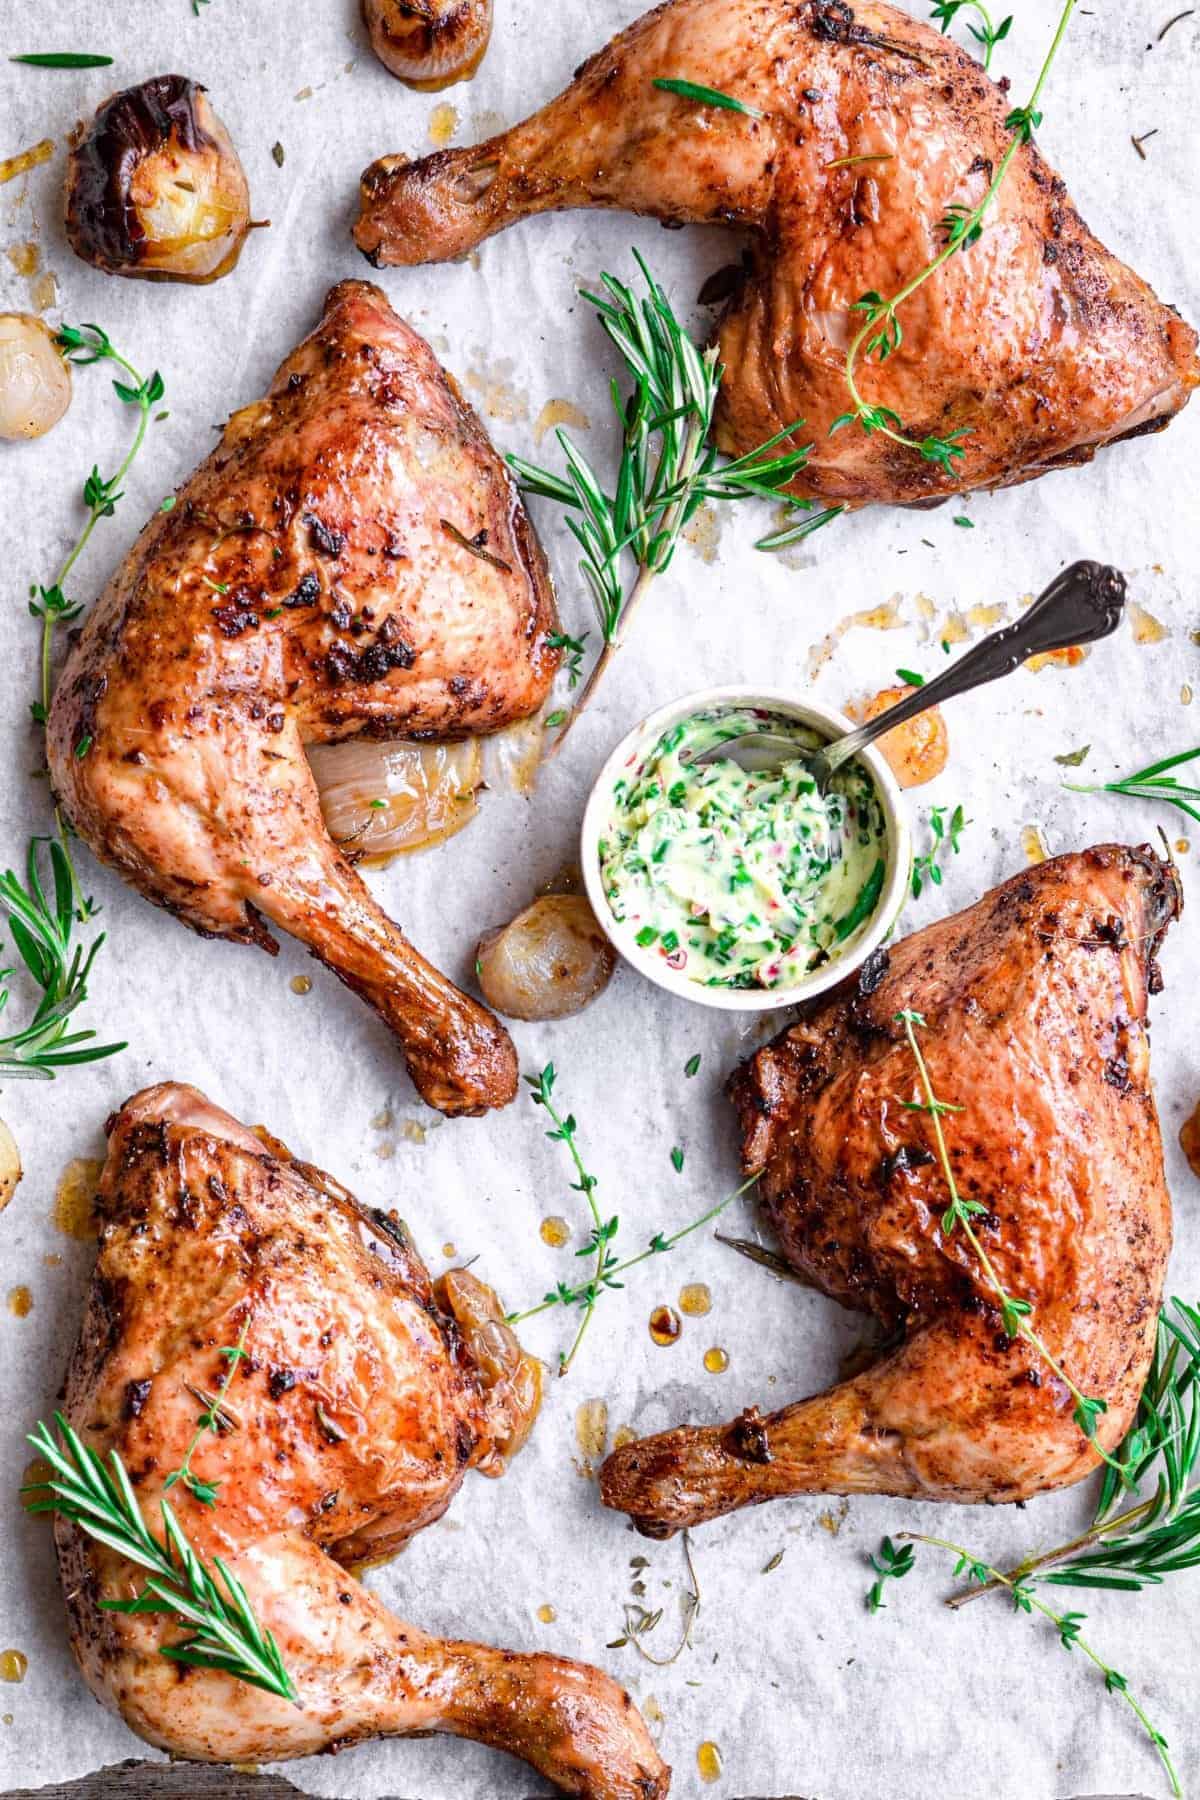 Roasted chicken legs served with herb butter